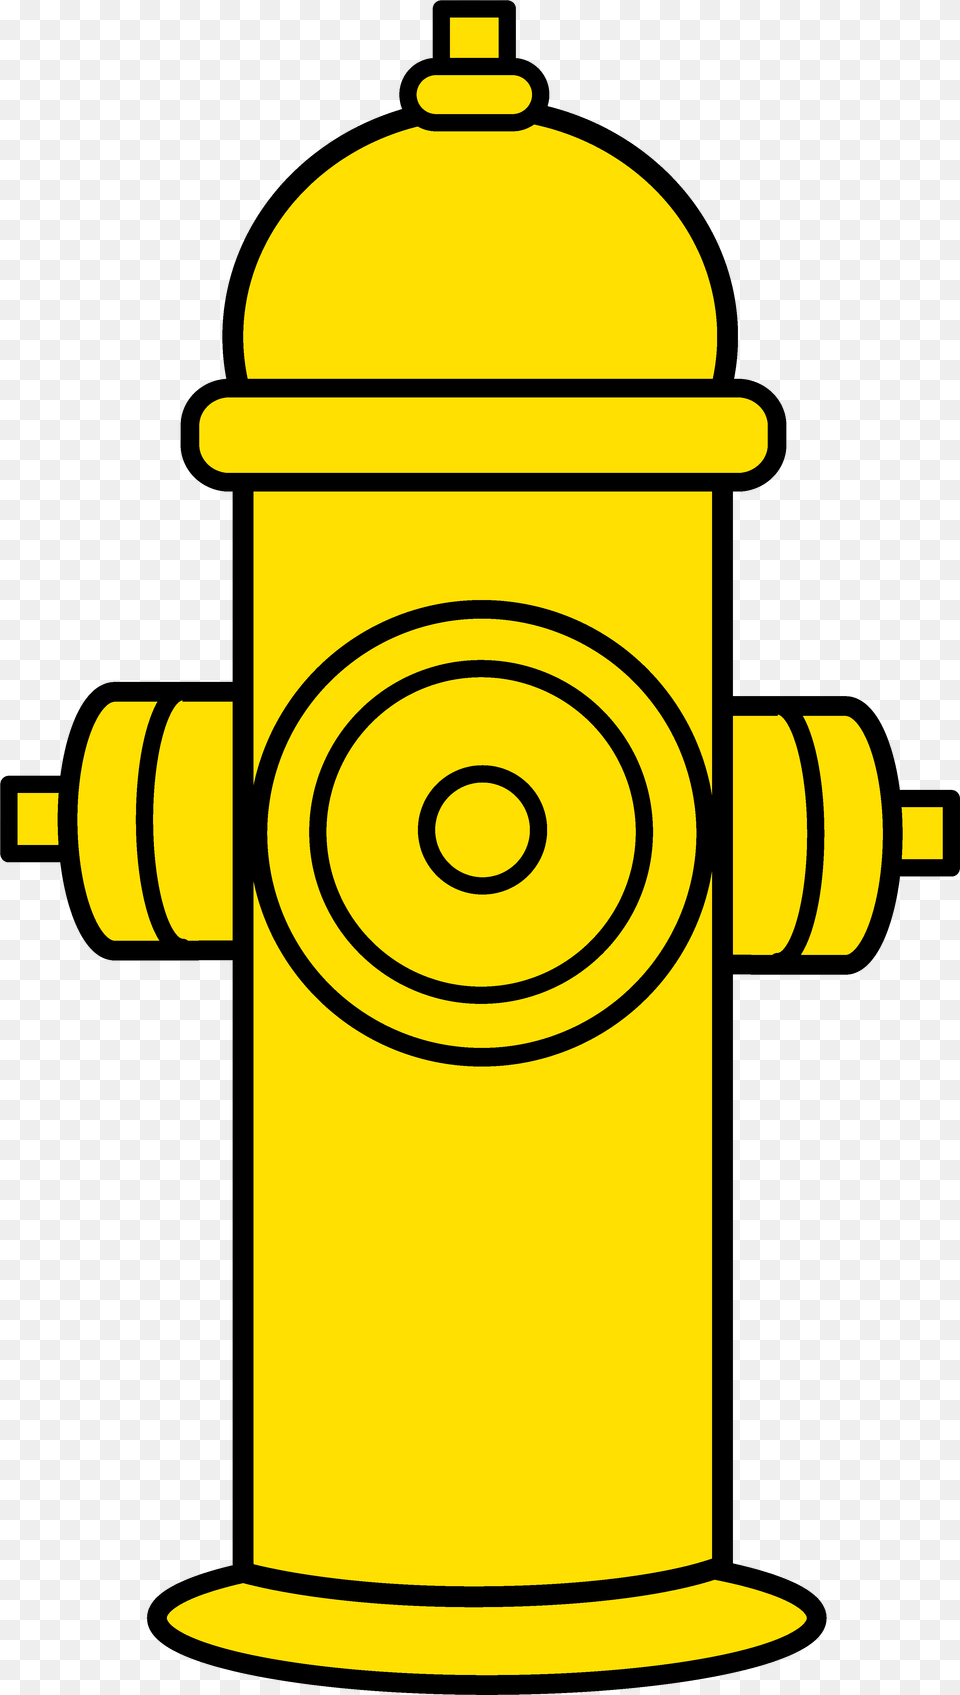 Sense Of Taste Clipart Yellow Fire Hydrant Clipart, Fire Hydrant Png Image